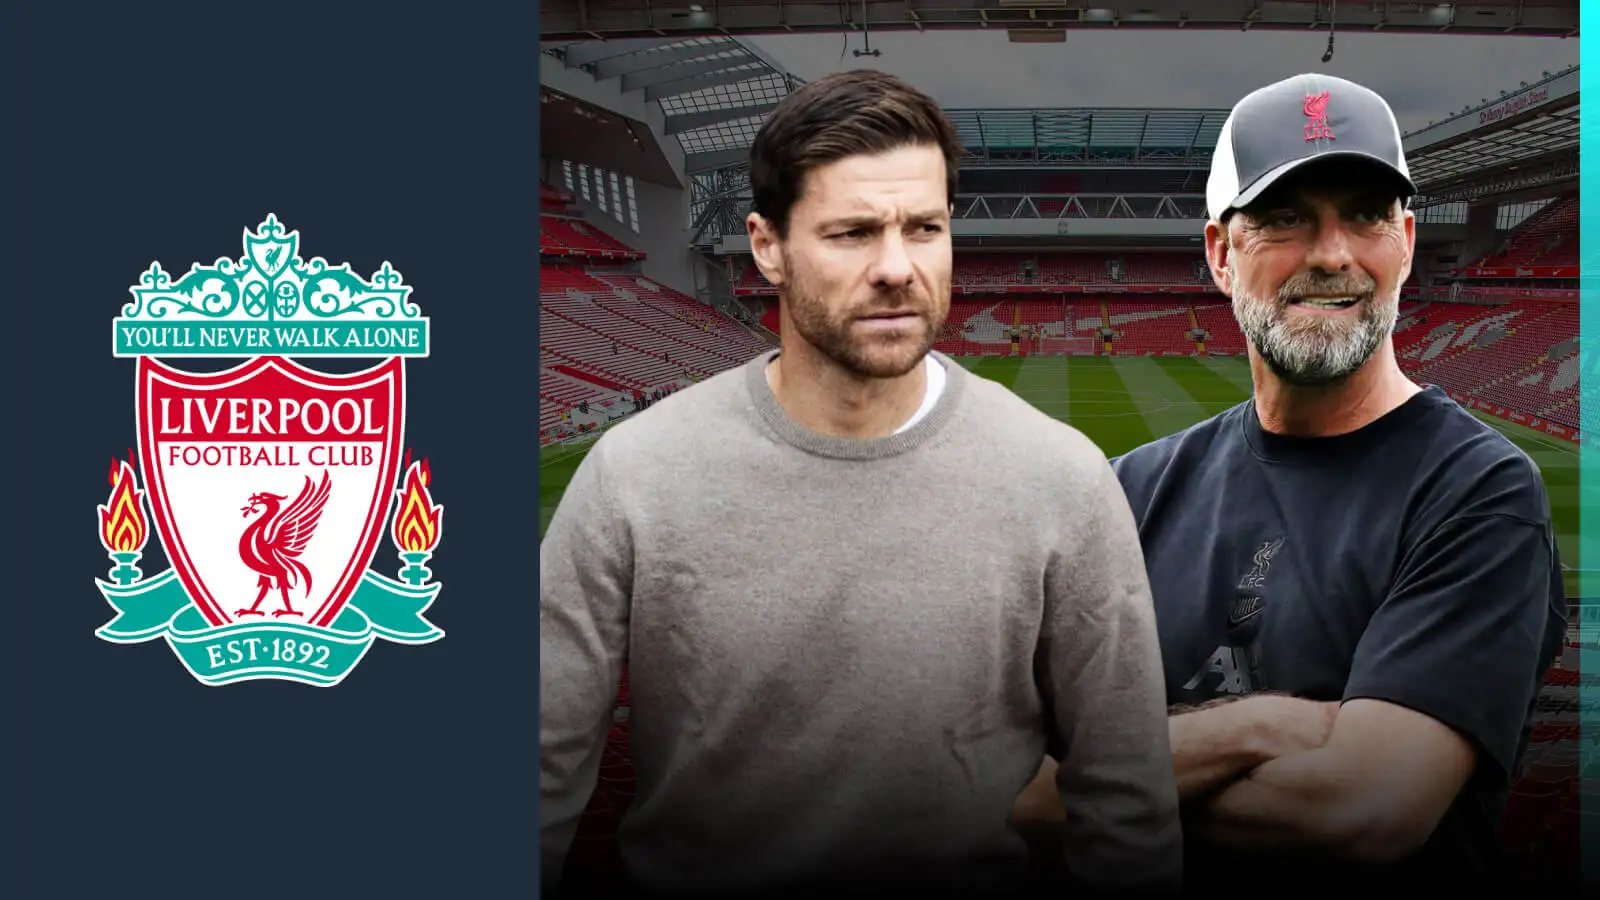 Xabi Alonso would be doomed as next Liverpool manager. And who really forced out Klopp...